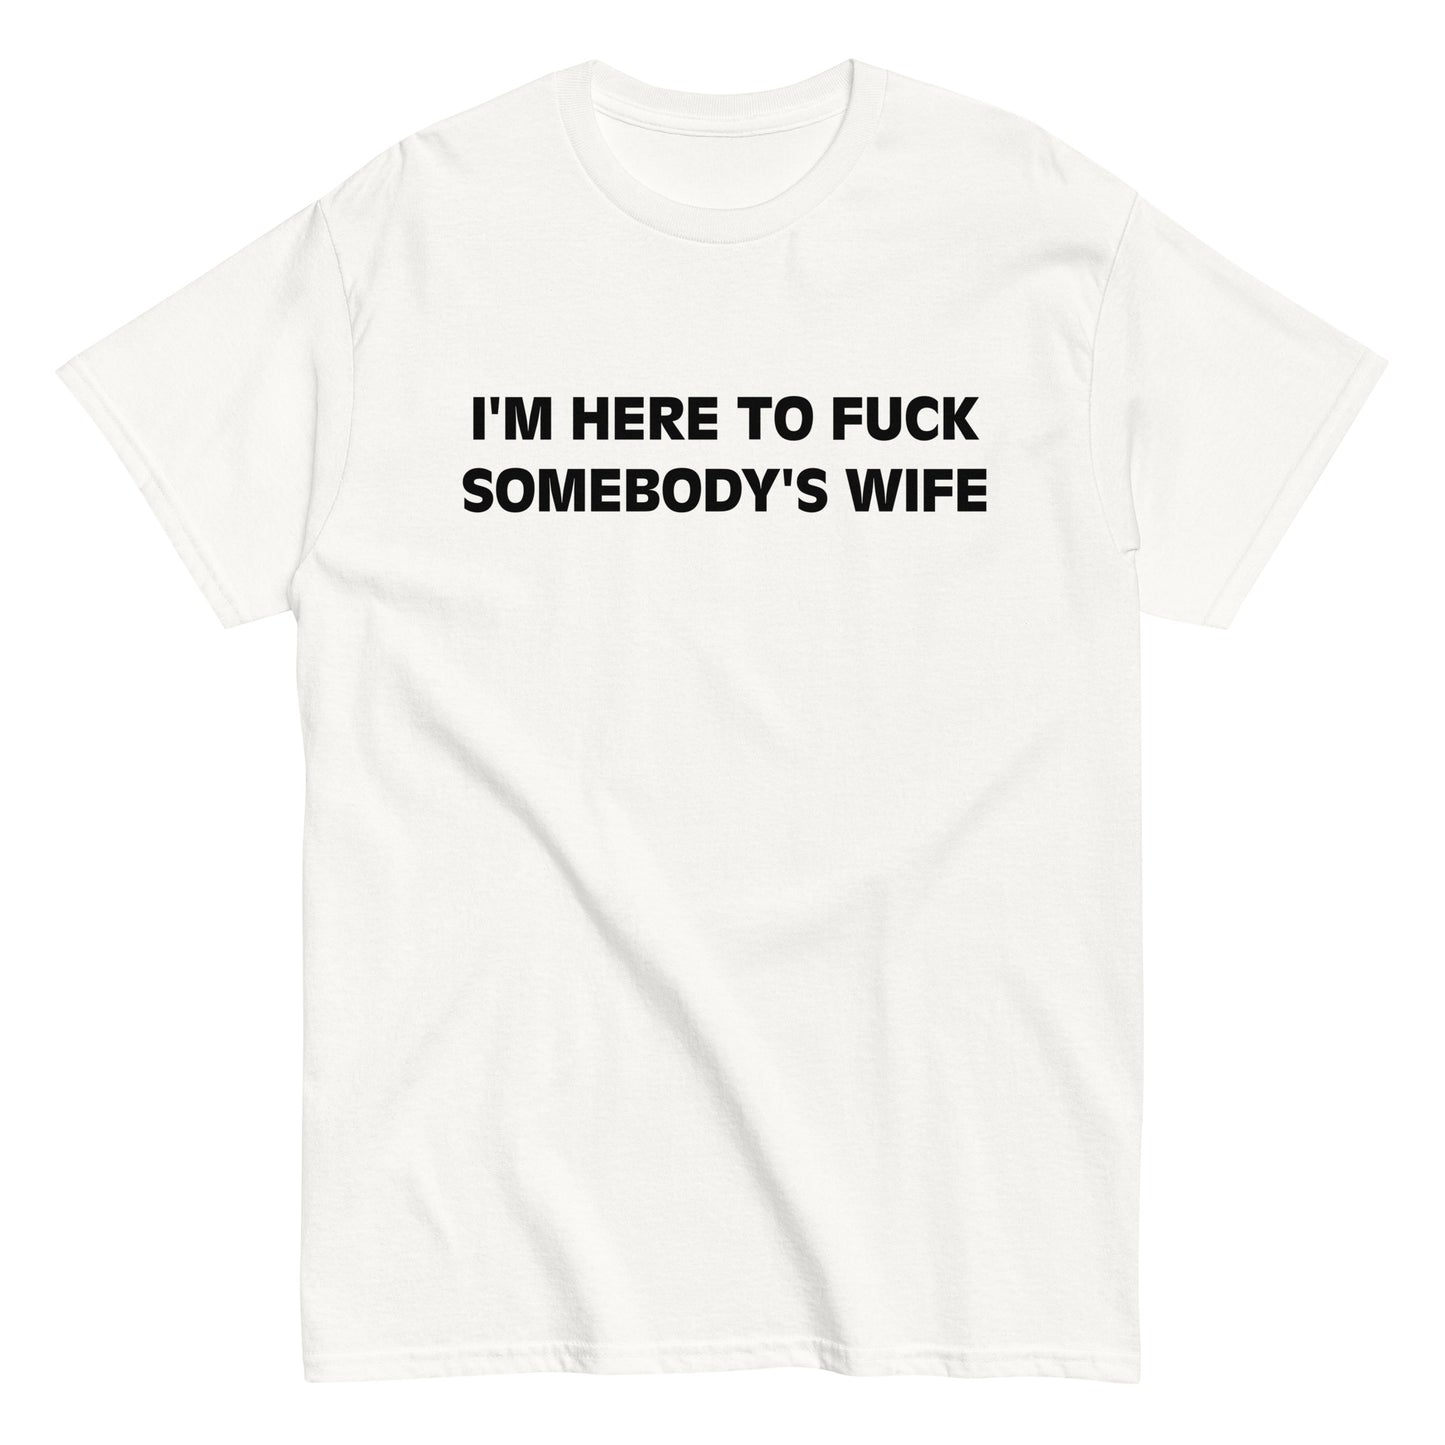 I'M HERE TO FUCK SOMEBODY'S WIFE T-Shirt